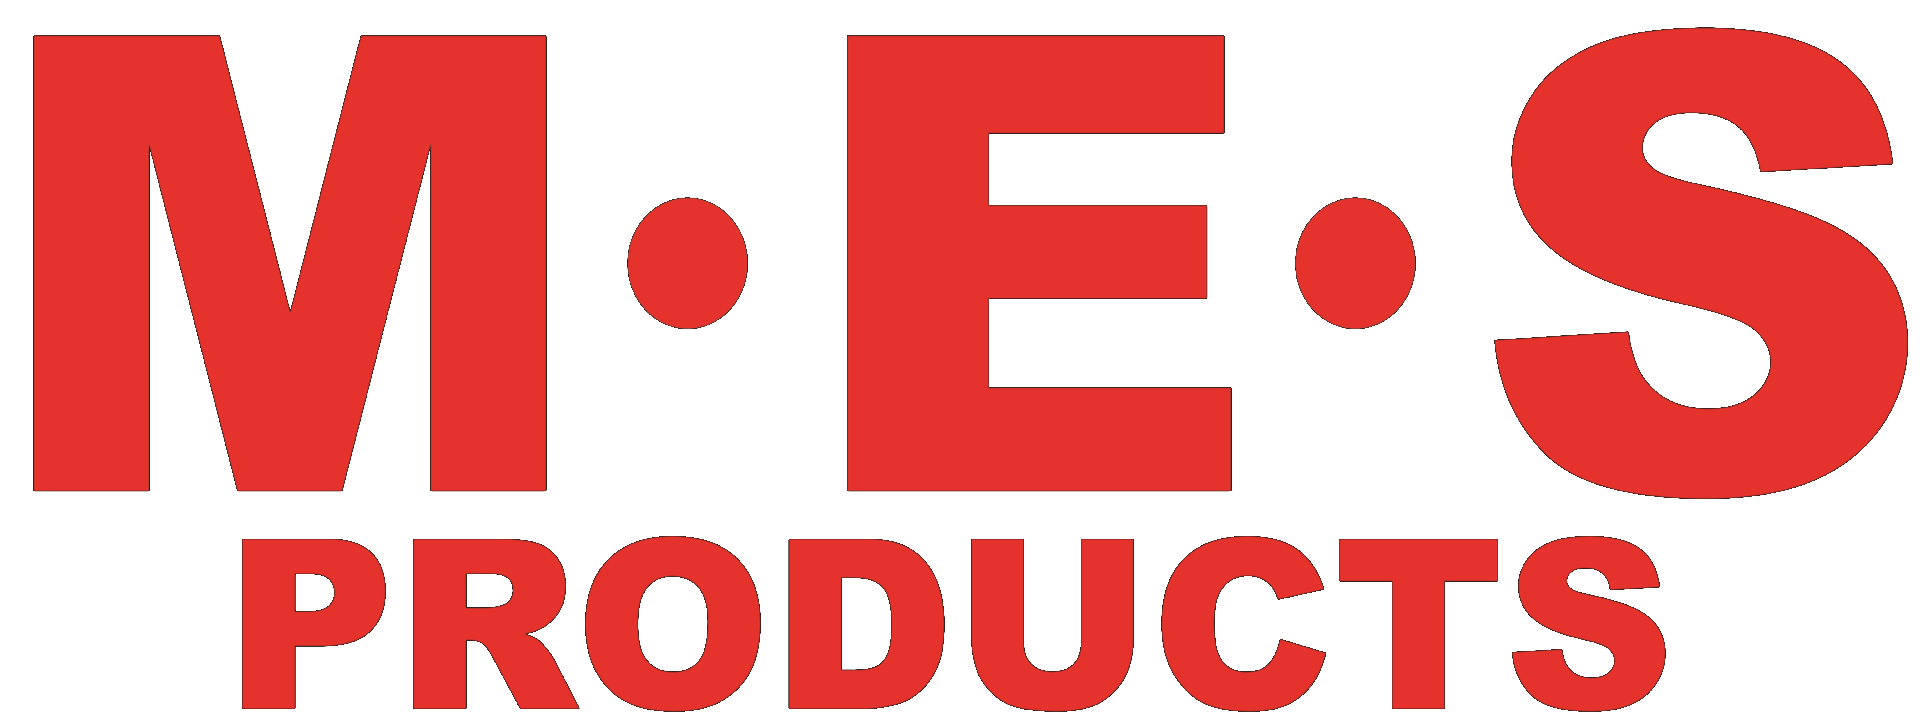 mes products logo